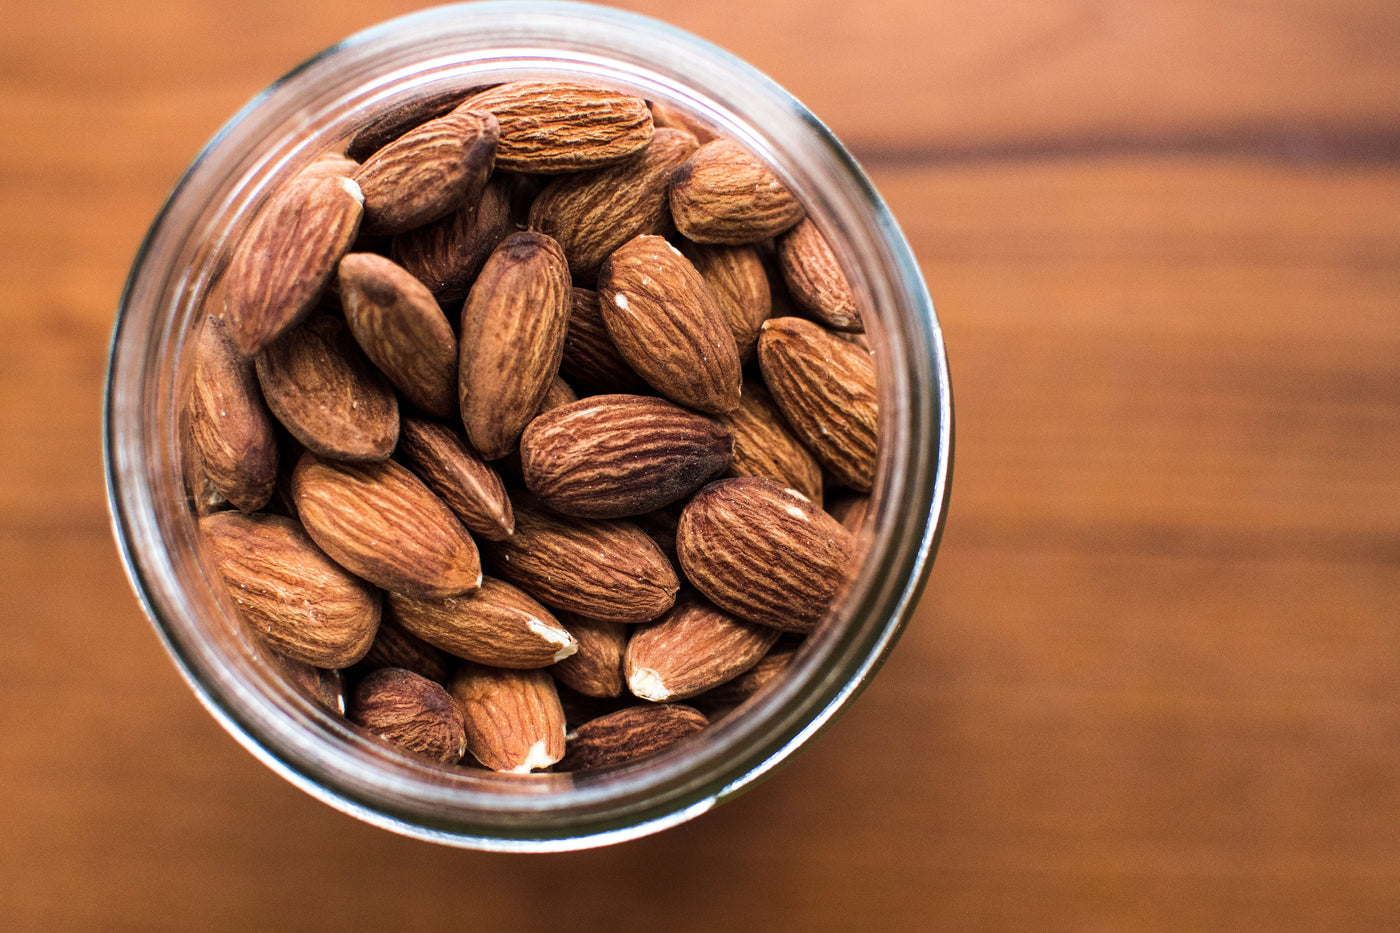 Wholesale Almonds in a bowl